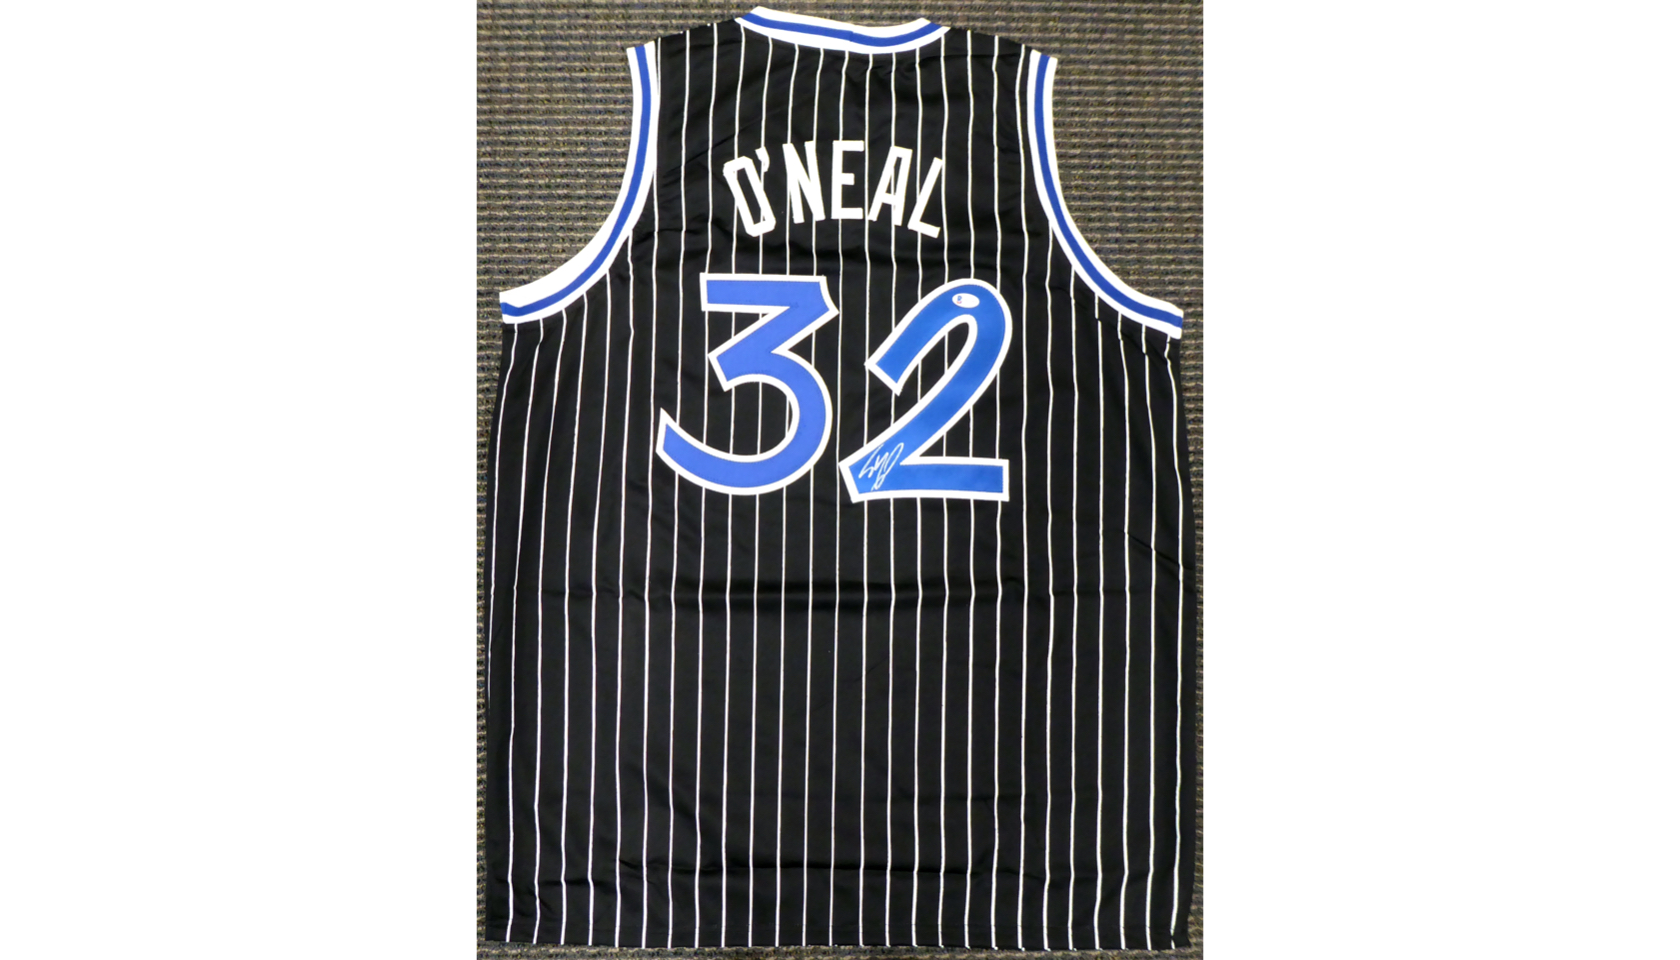 Shaquille O'Neal and Magic Johnson Signed Mitchell&Ness Los Angeles Lakers  Jerseys - CharityStars